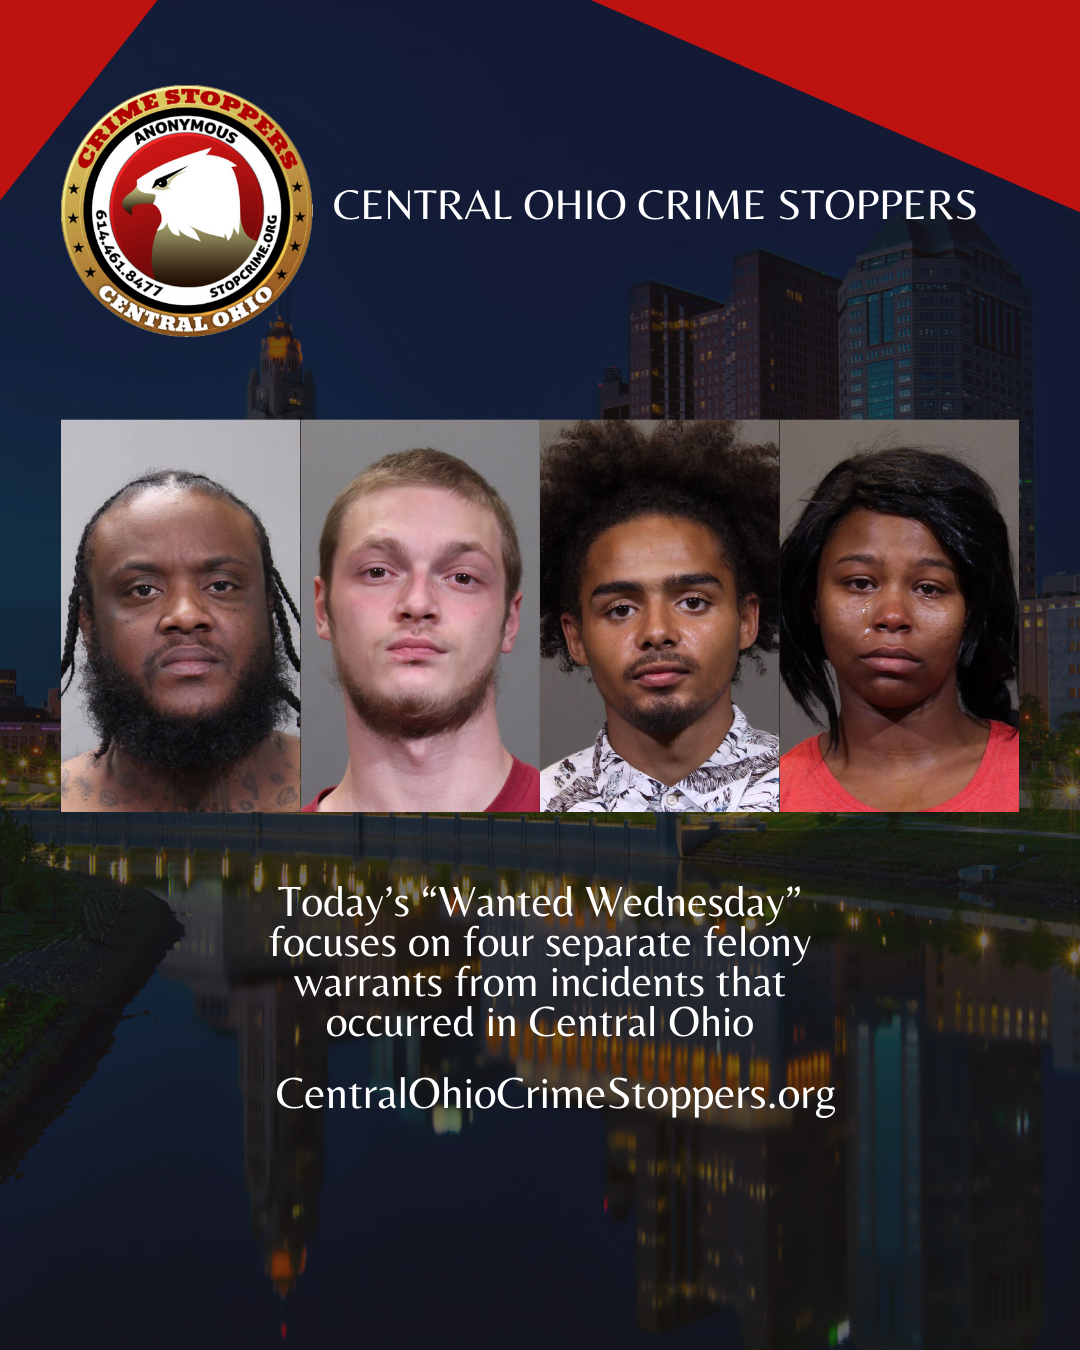 Today’s Wanted Wednesday focuses on four separate felony warrants from incidents that occurred in Central Ohio